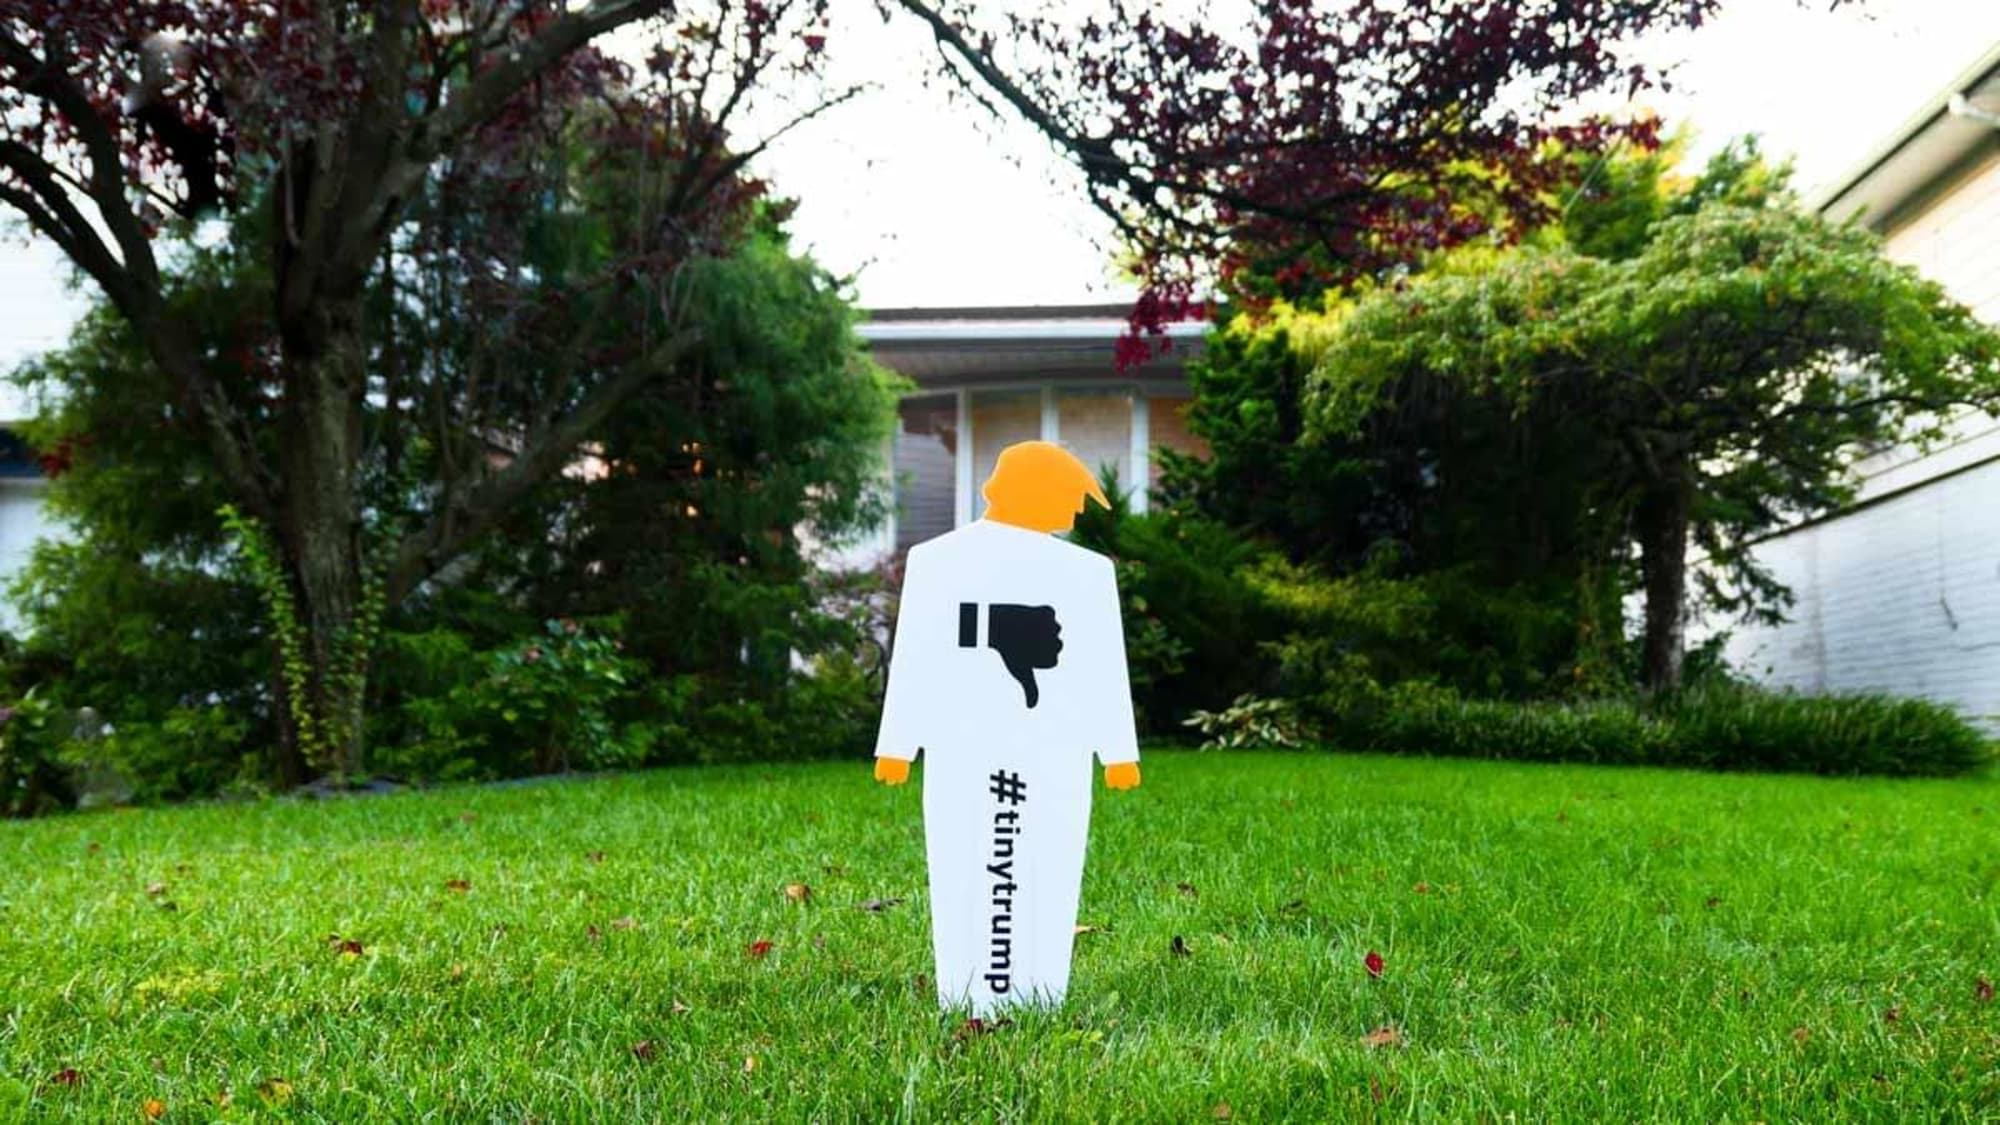 Two foot tall lawn sign in the shape of a tiny trump—a cardboard cutout caricature of trump—with a thumbs down sign on the chest. The lawn sign is made out of plastic, is white with orange head and hands. It is mounted on a lawn in front of a suburban house which is in the background.